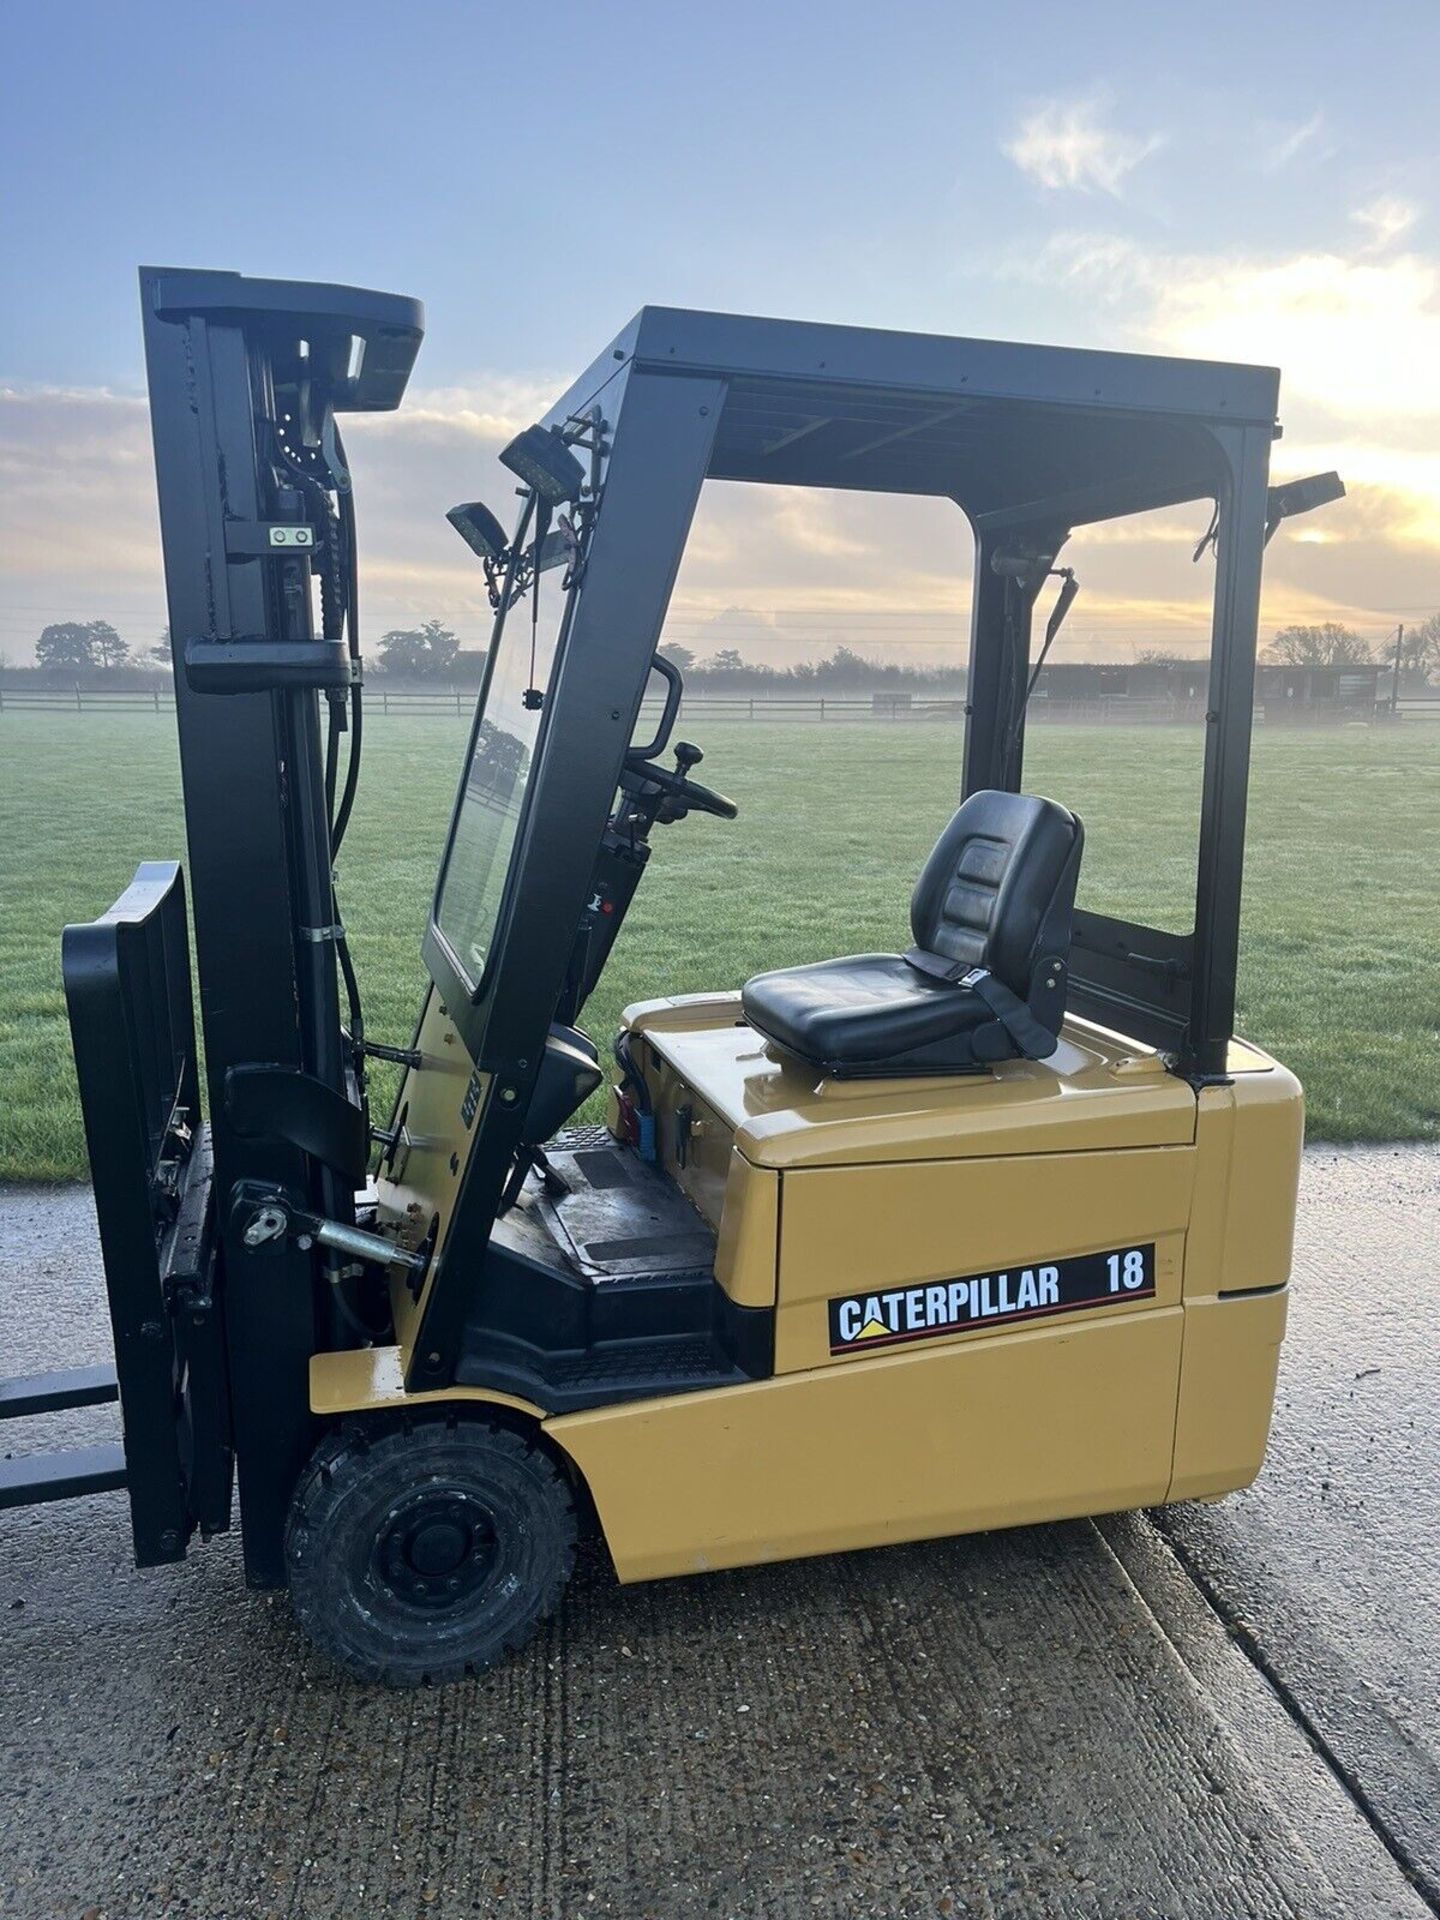 CATERPILLAR 1.8 Electric Forklift Truck (Container Spec) - Image 4 of 4